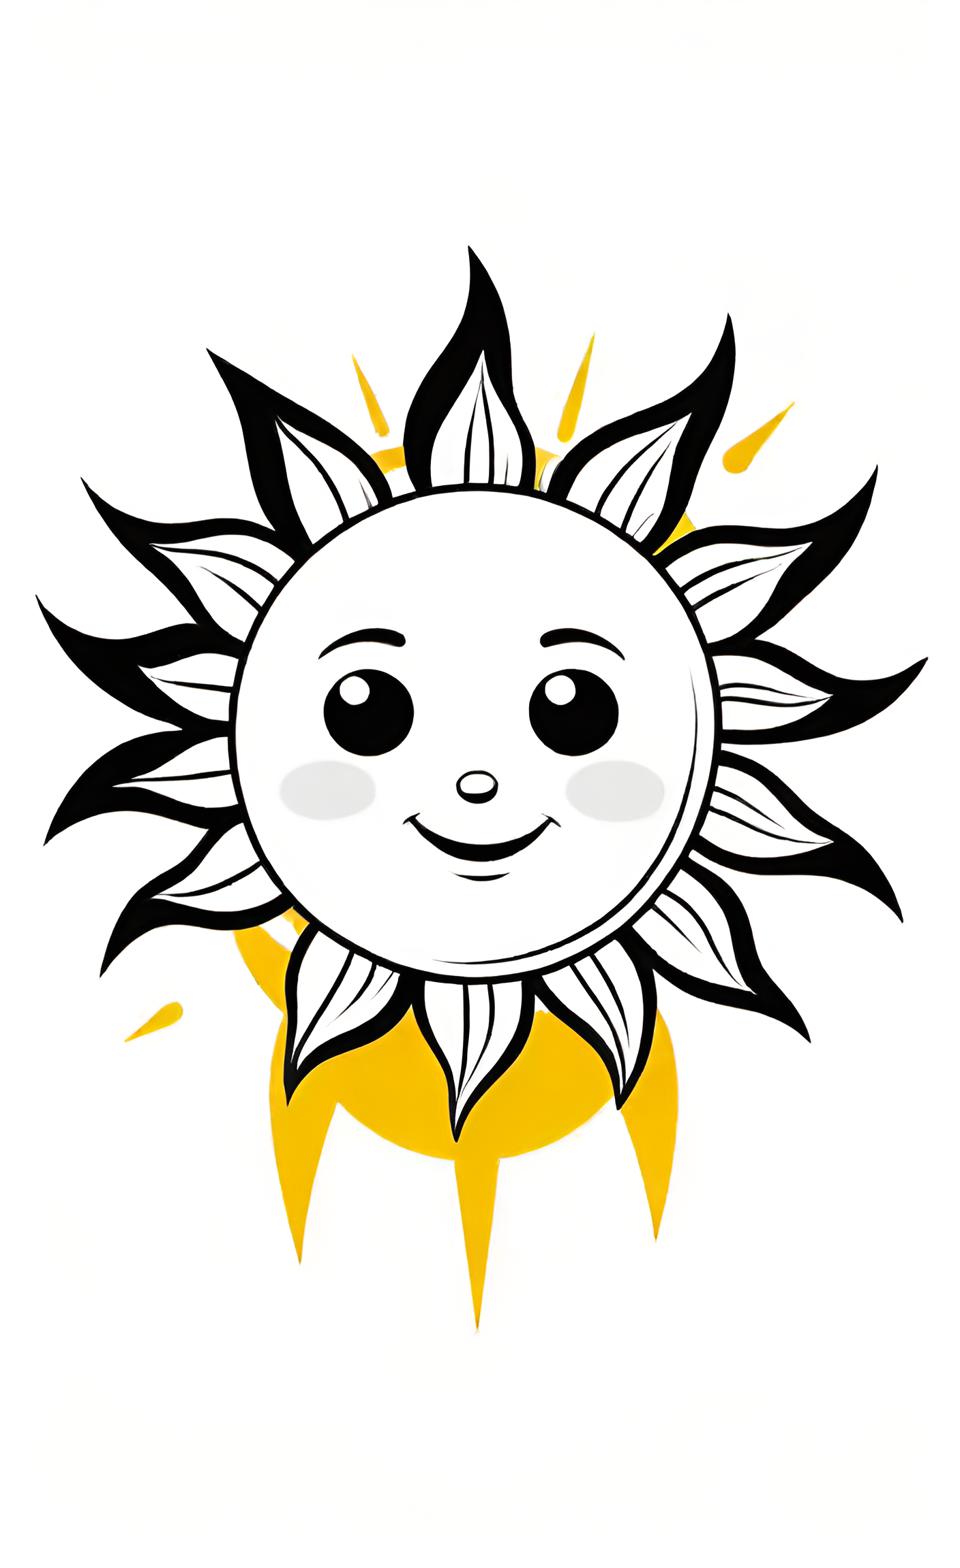 Sun Coloring Pages For Kids